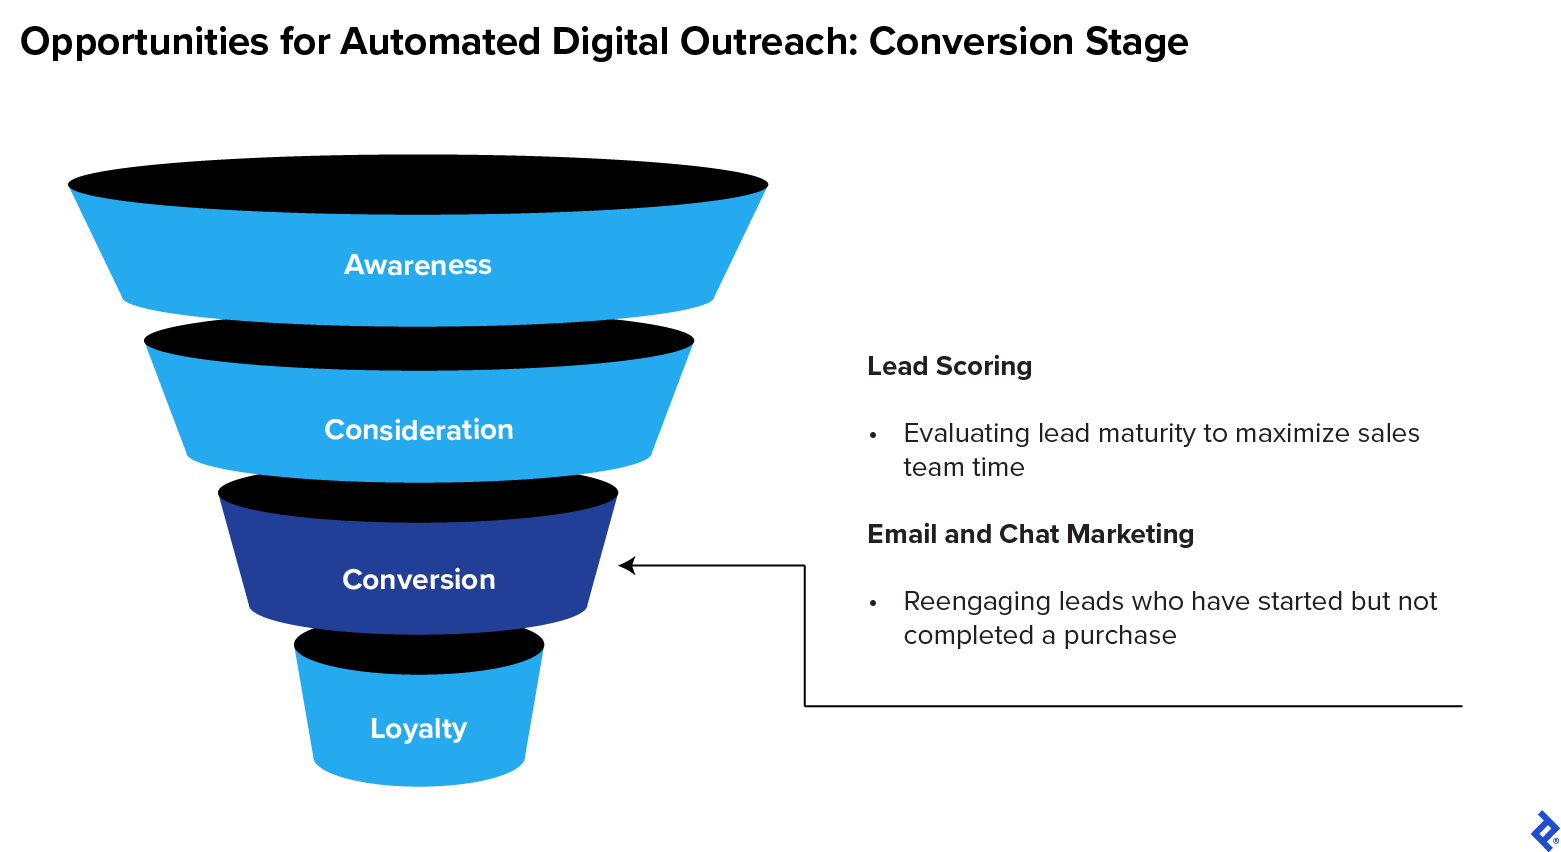 Ideas for conversion-stage outreach automation efforts: lead scoring based on detailed analytics and lead reengagement for email and chat marketing.